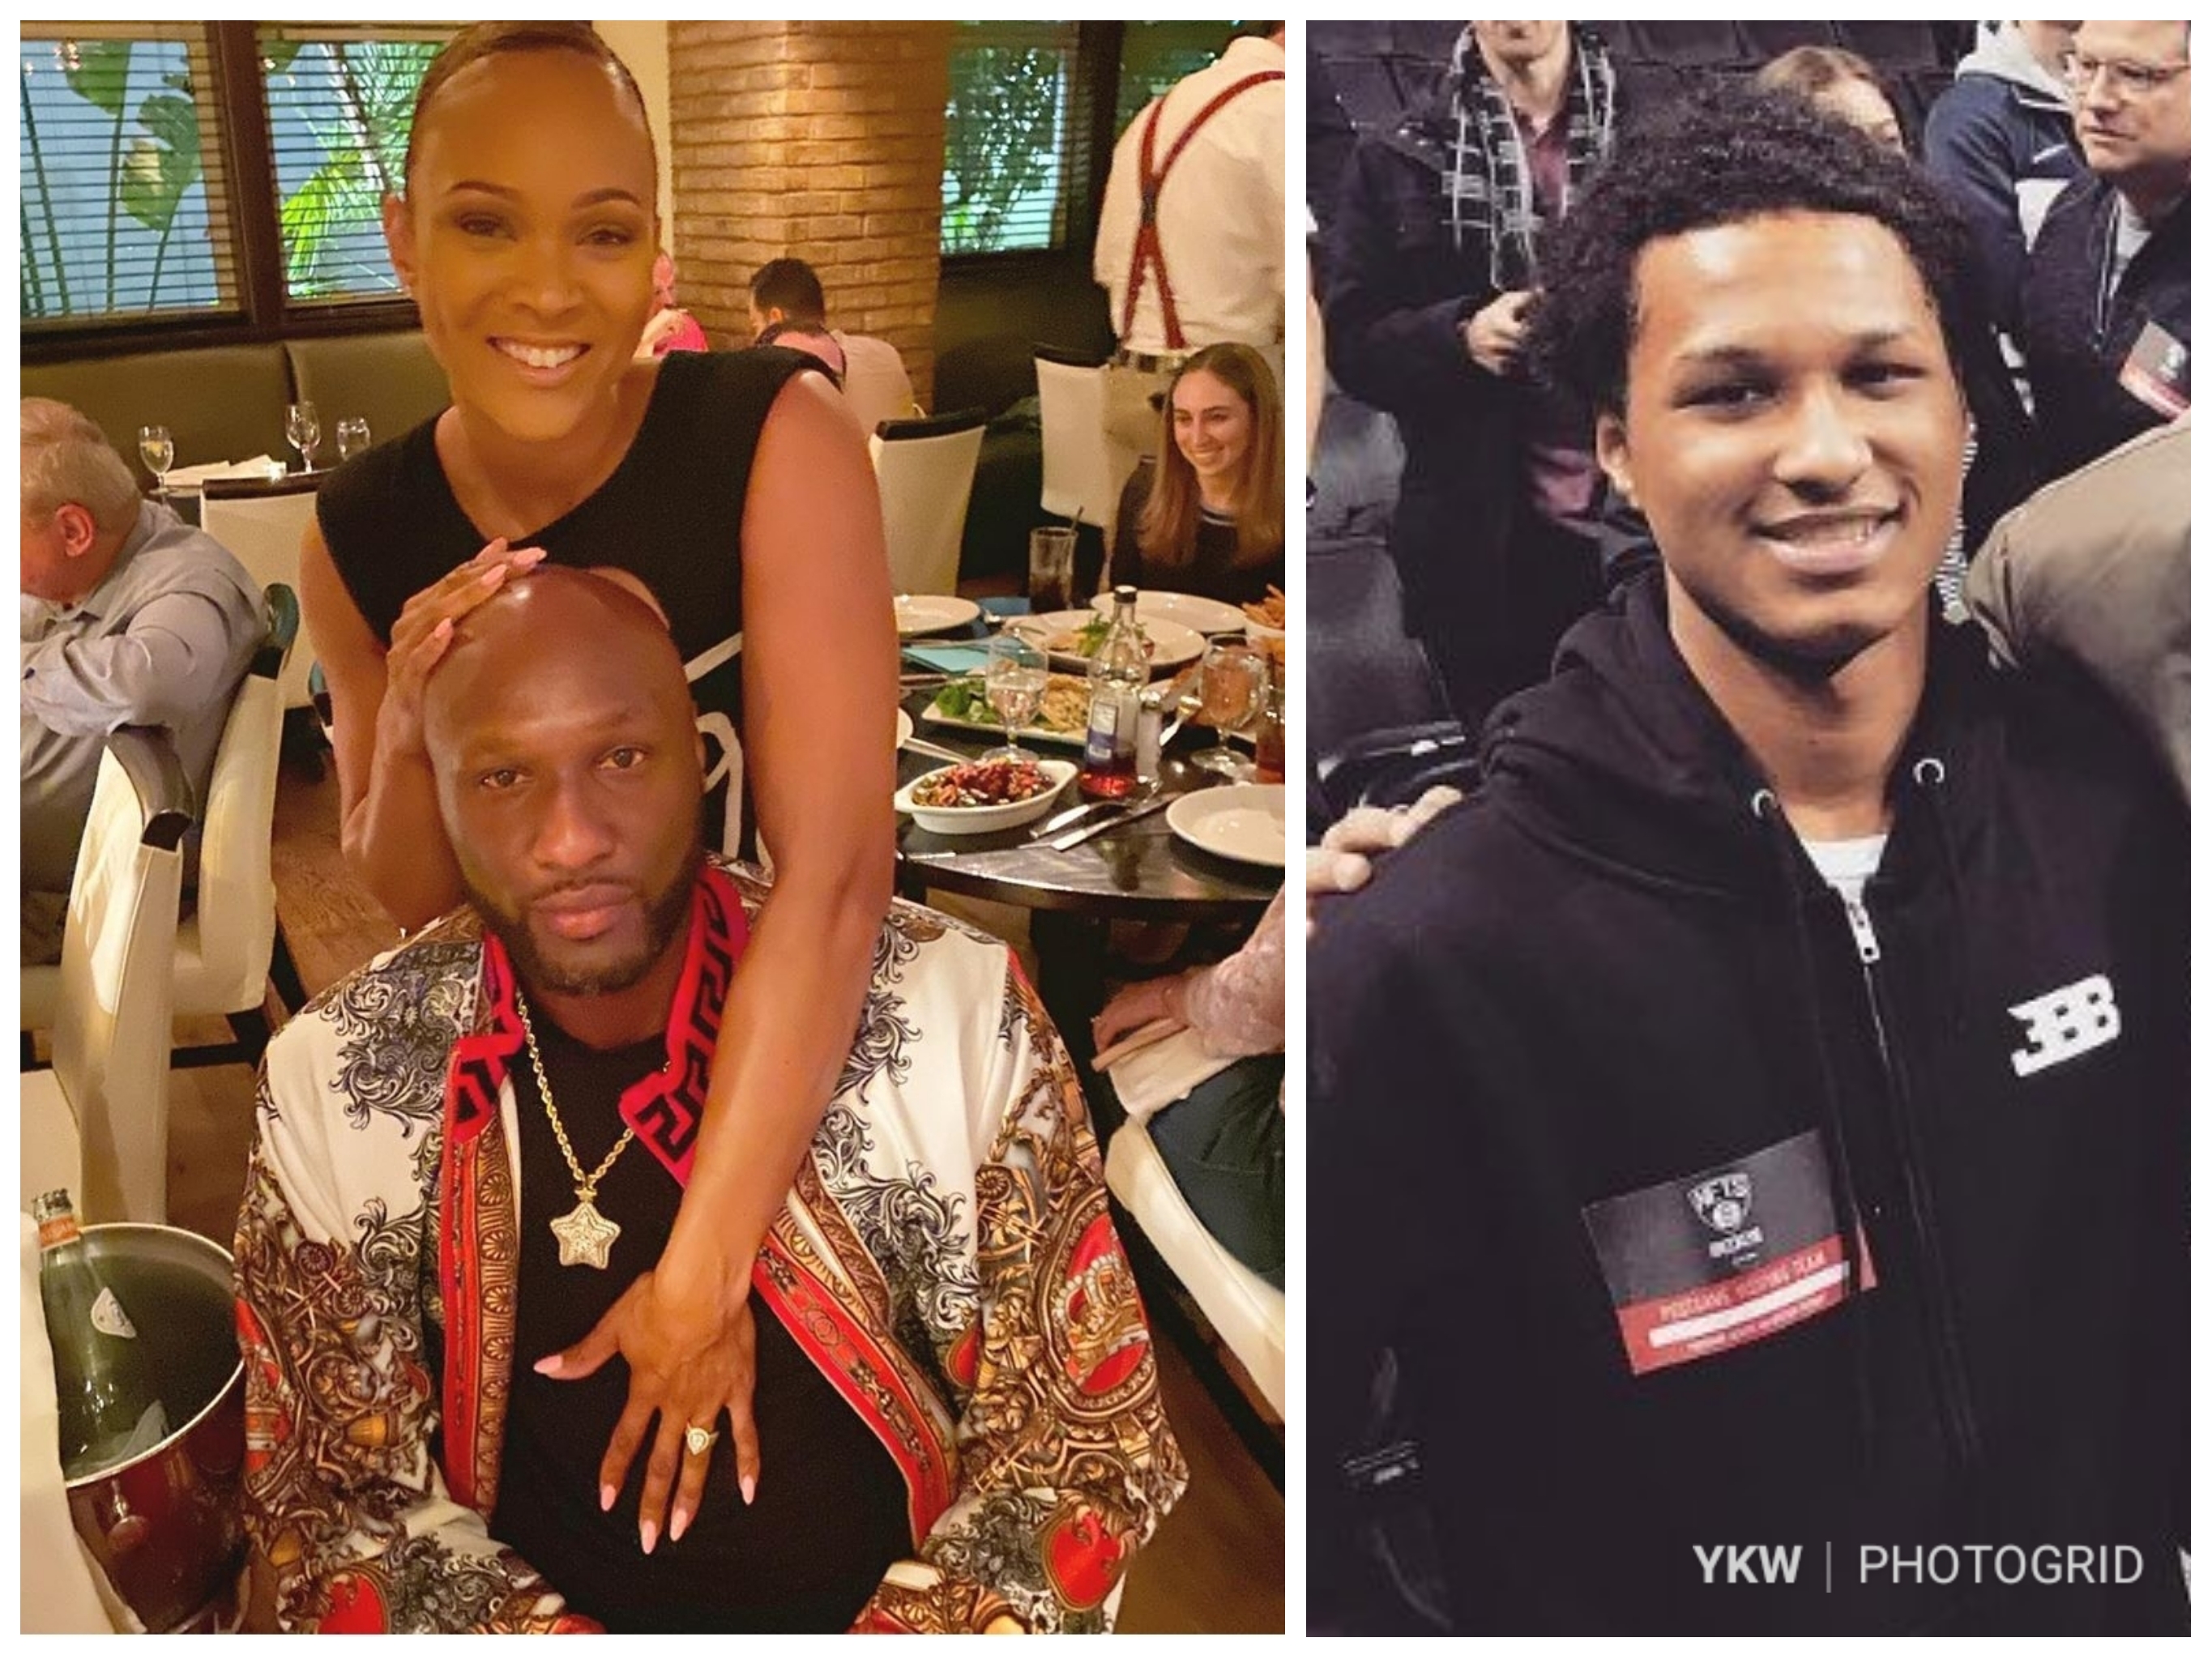 Lamar Odom Is Engaged To Sabrina Parr And His Son Is Hurt After Finding Out On Social Media